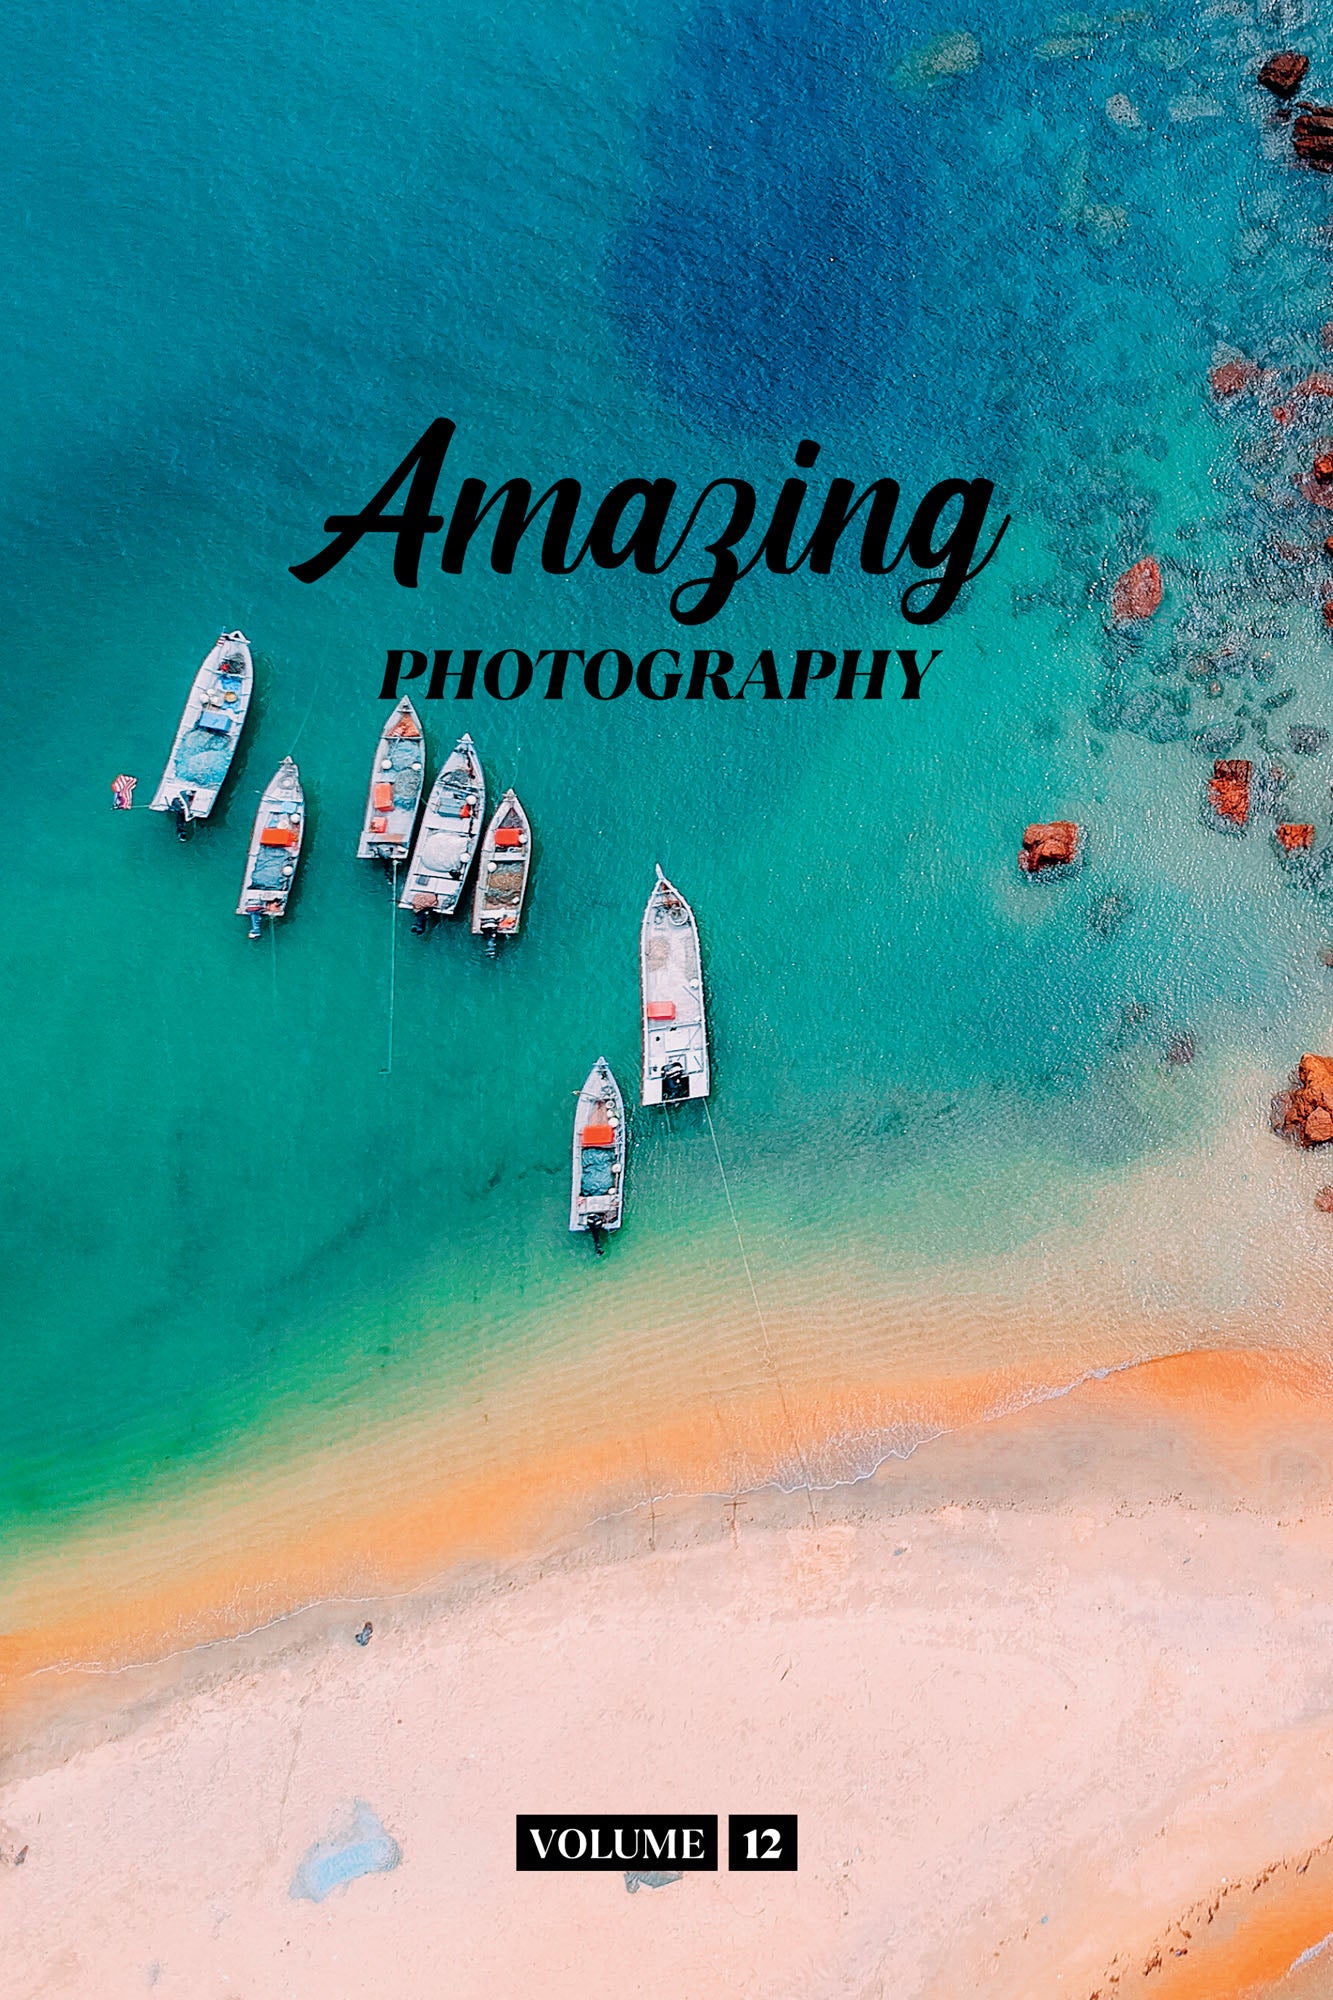 Amazing Photography Volume 12 (Physical Book)